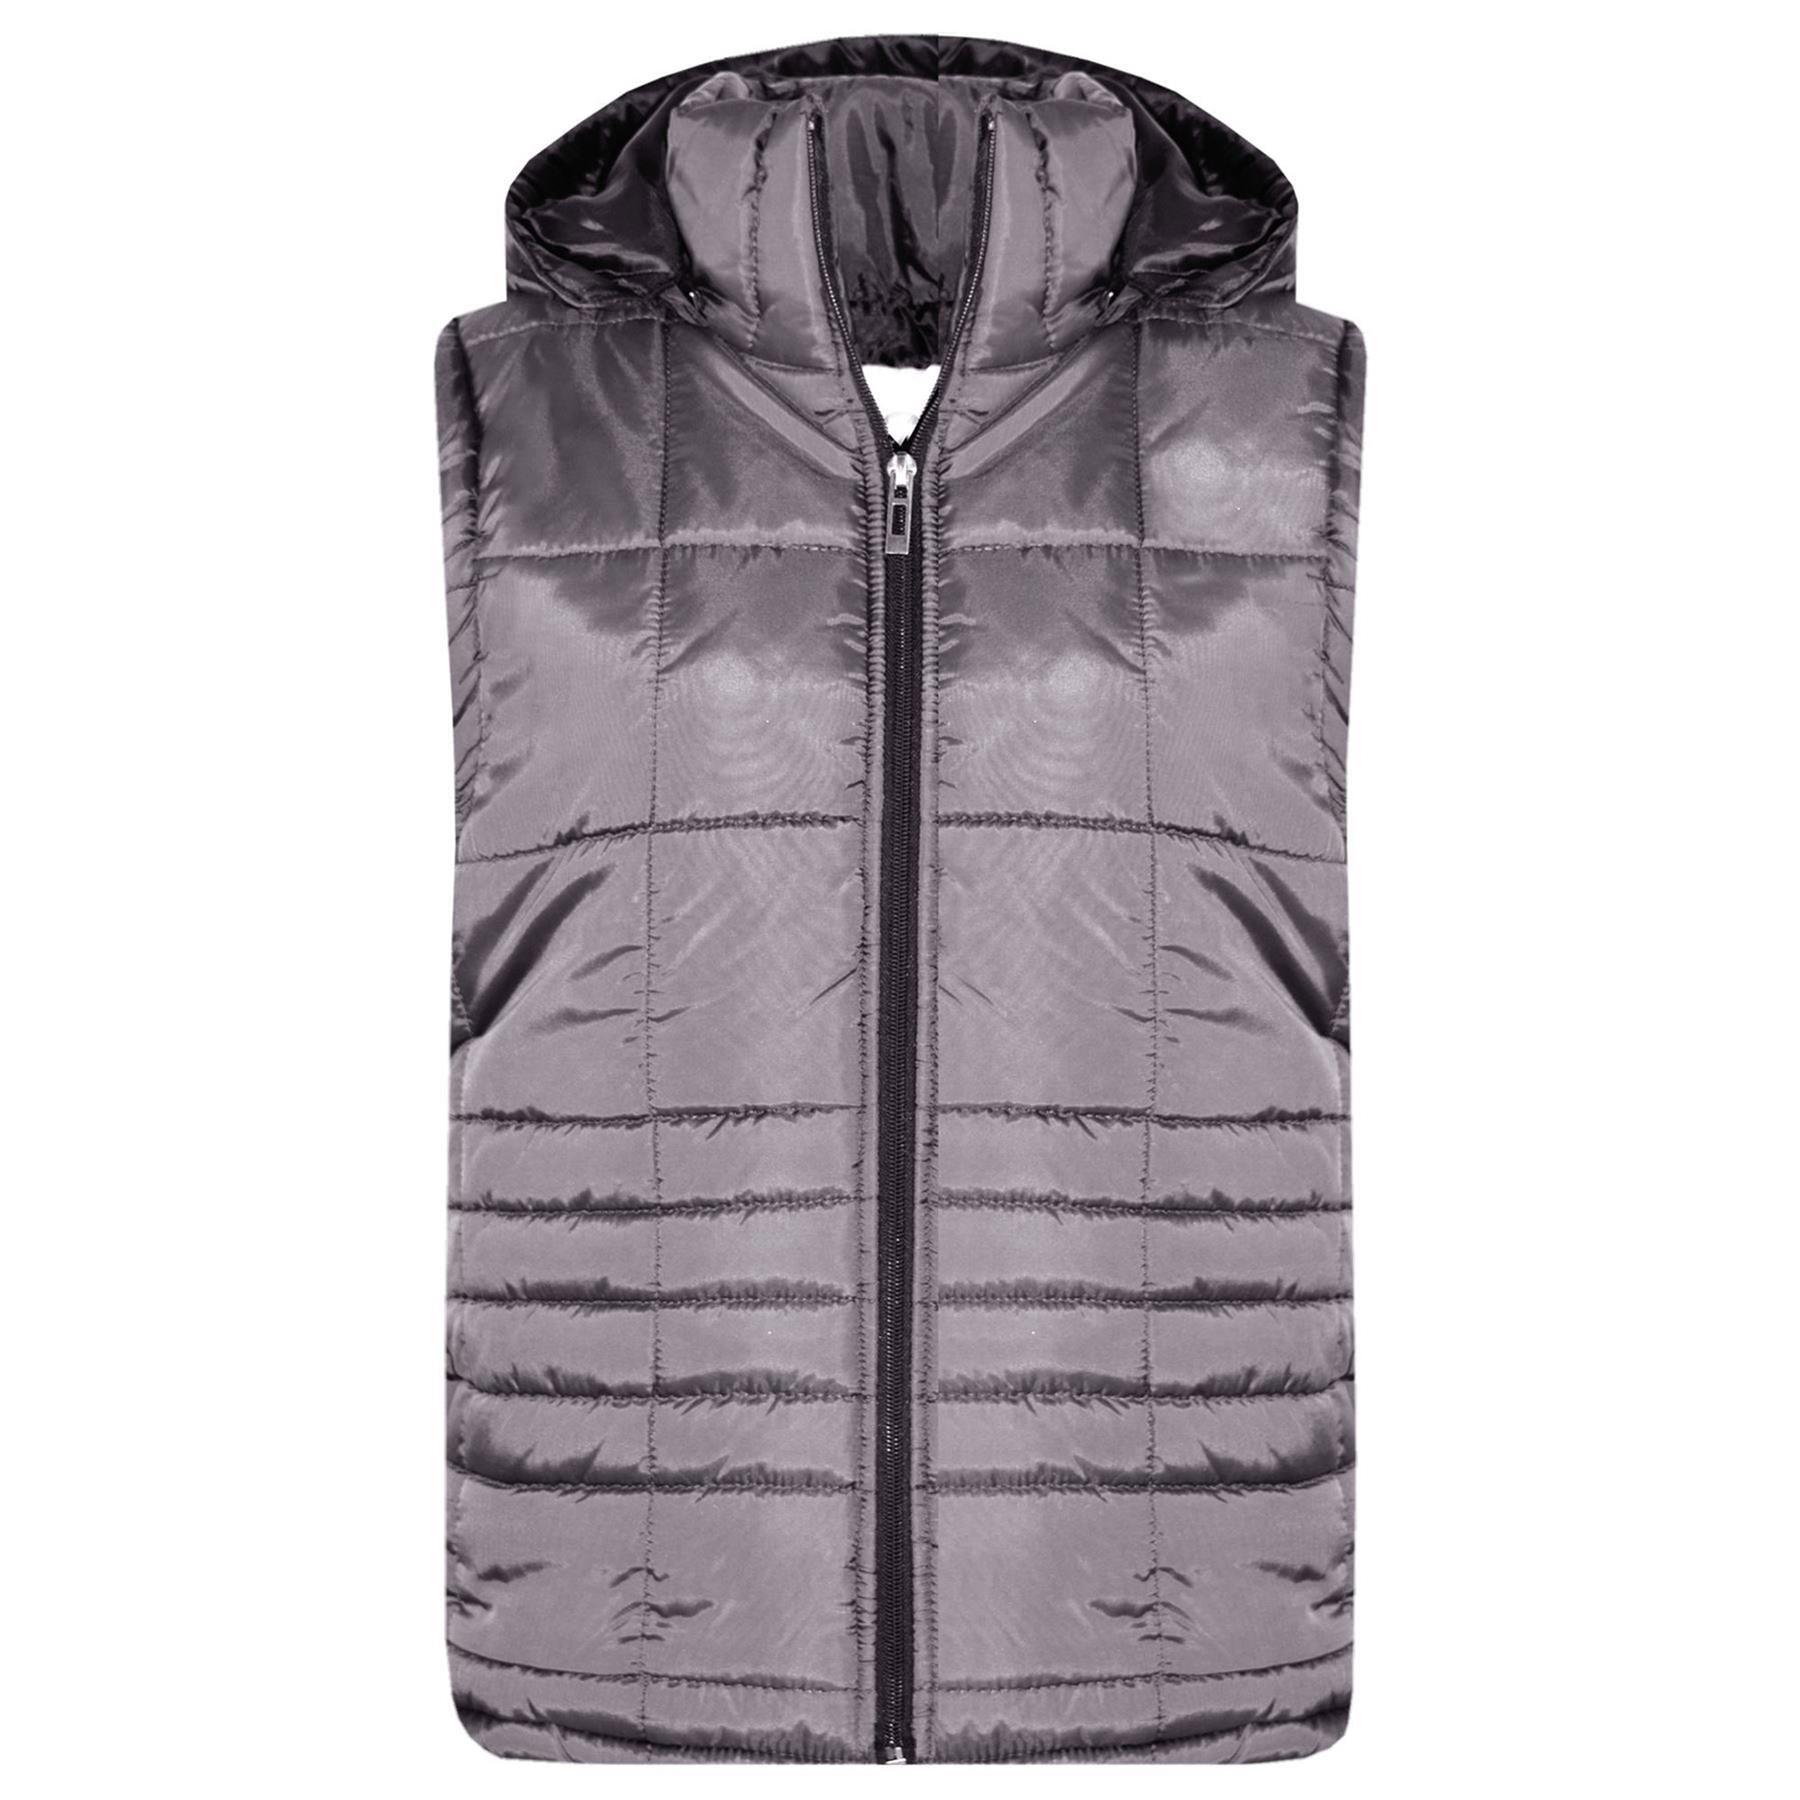 Kids Girls Boys Puffer Quilted Hooded Sleeveless Steel Grey Jacket